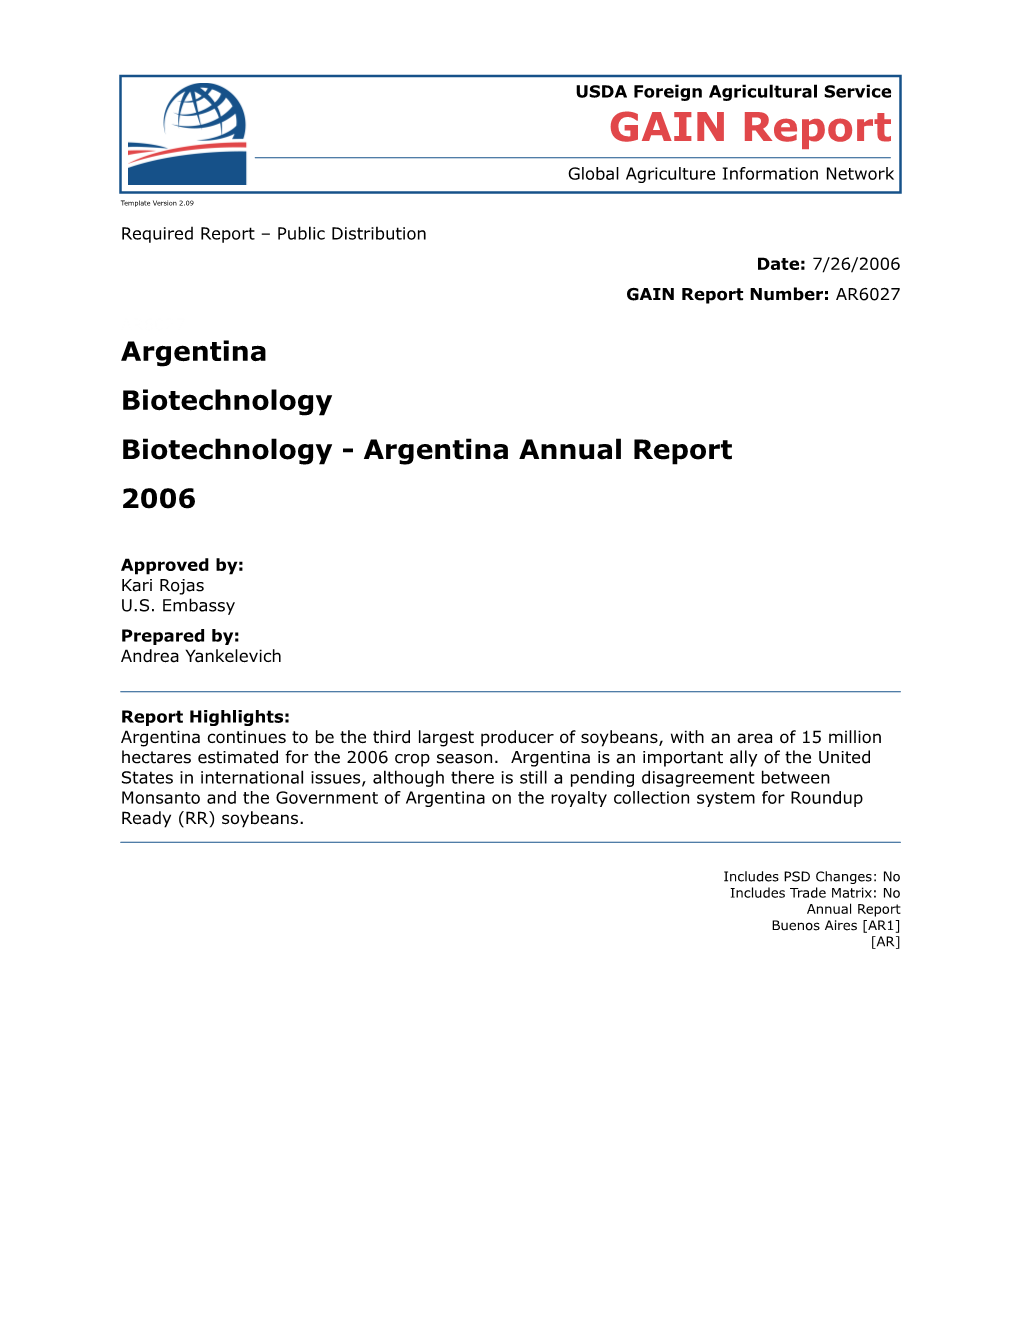 Biotechnology - Argentina Annual Report